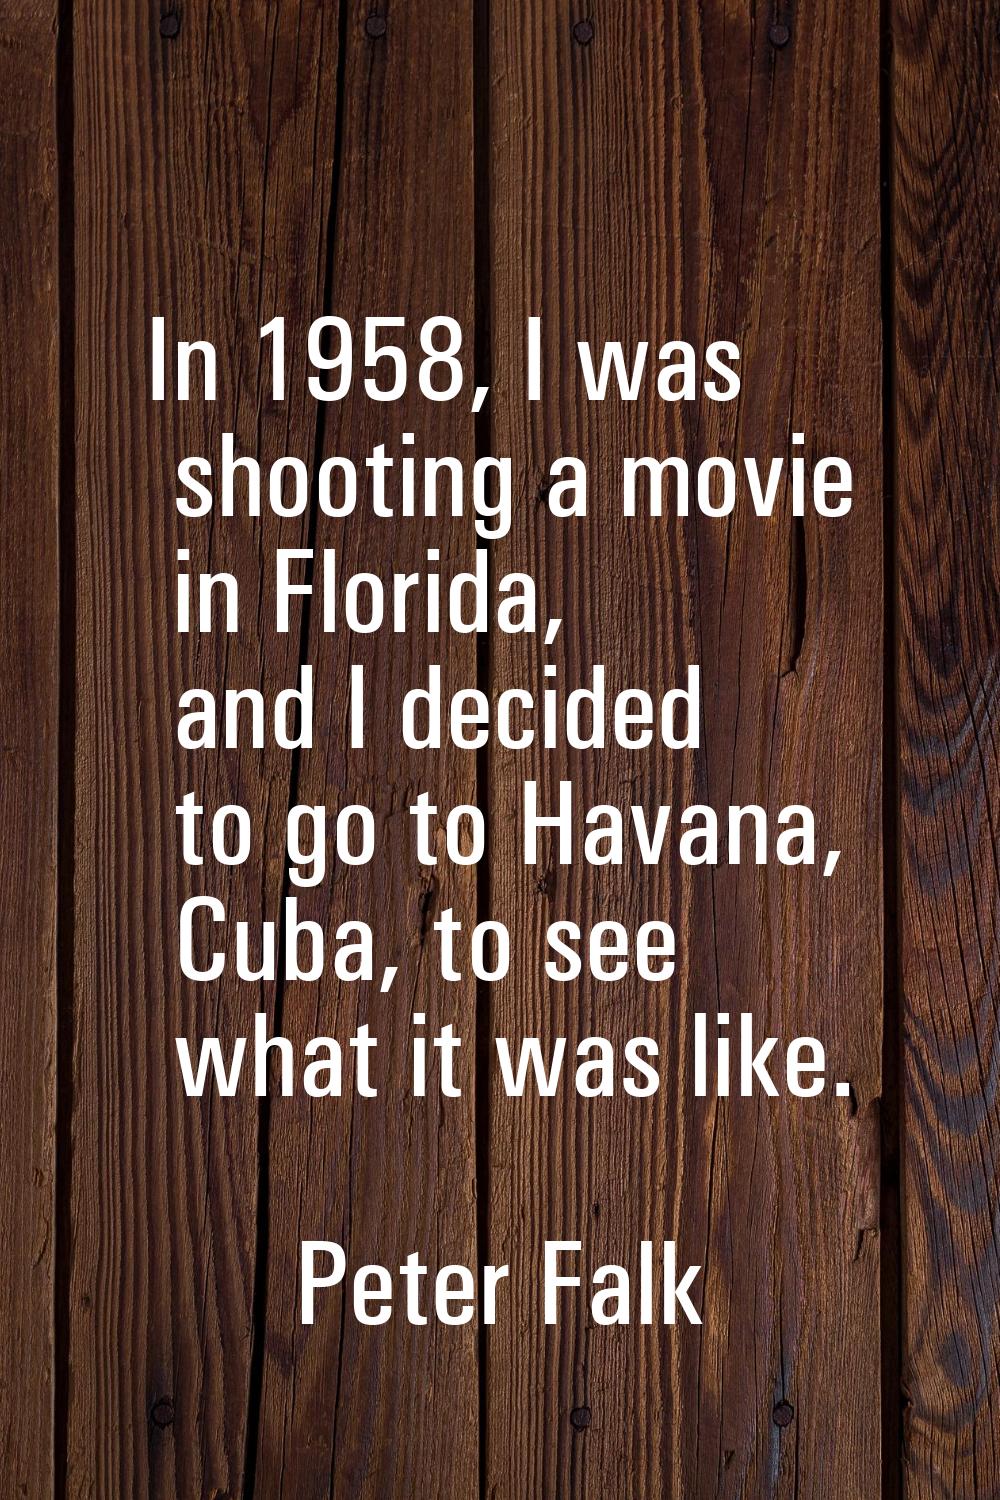 In 1958, I was shooting a movie in Florida, and I decided to go to Havana, Cuba, to see what it was